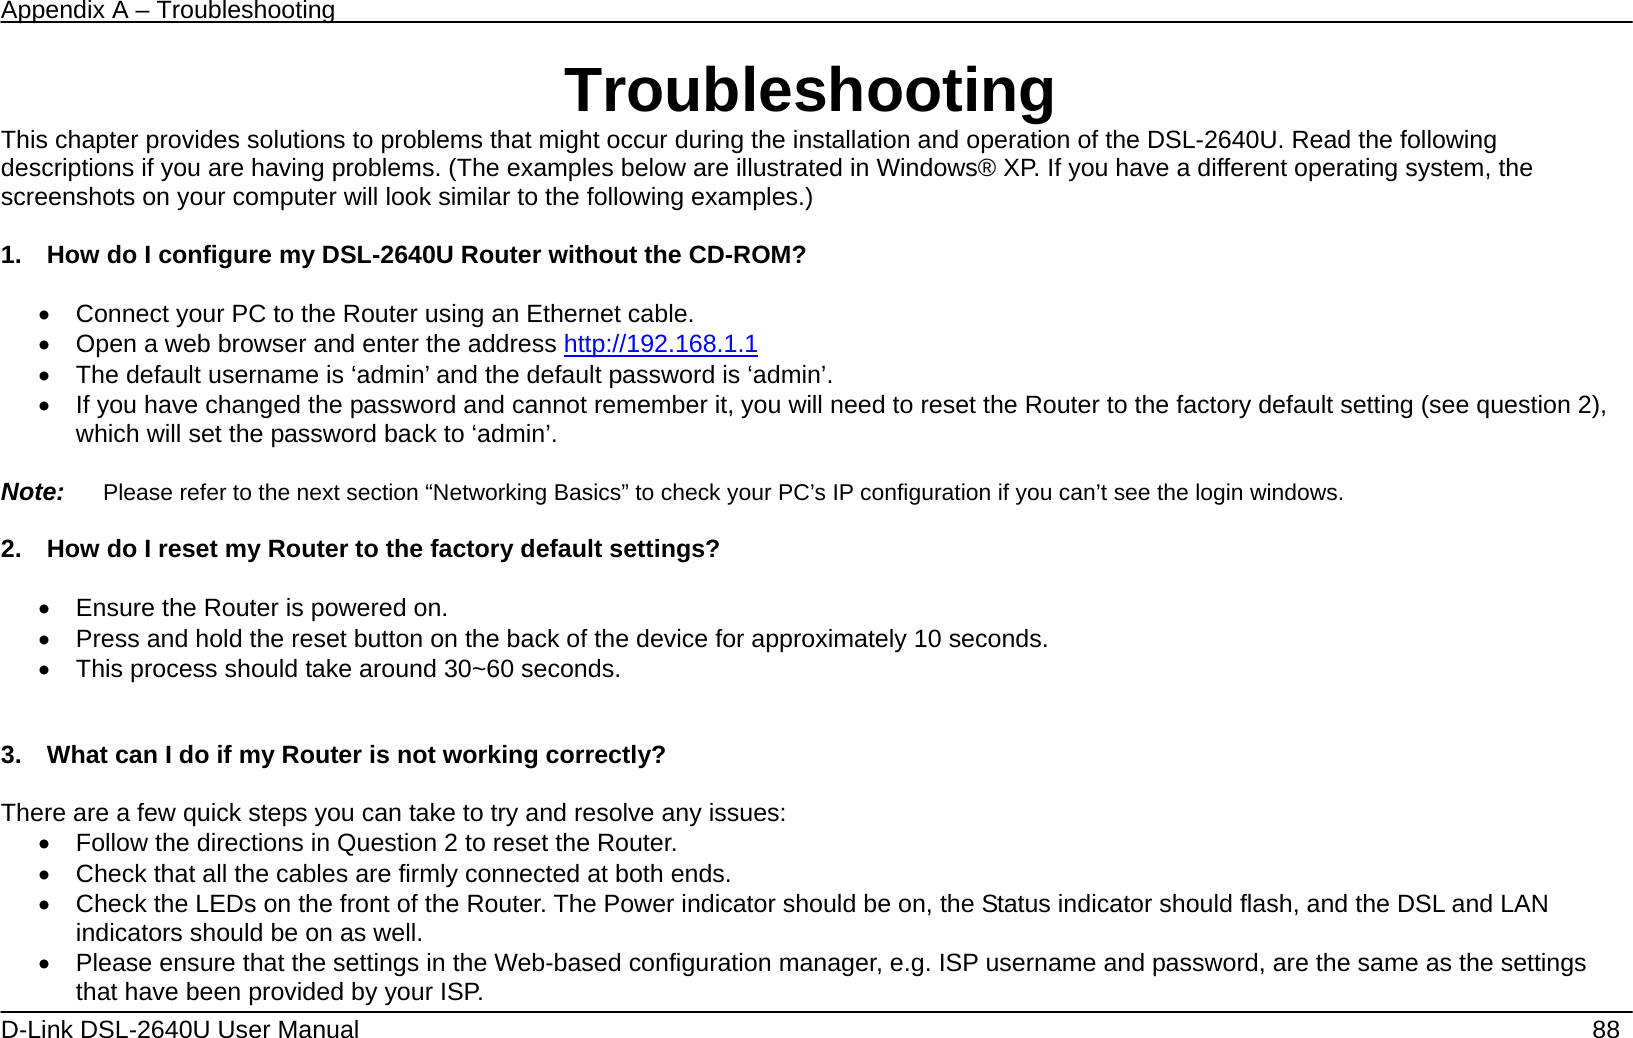 Appendix A – Troubleshooting   D-Link DSL-2640U User Manual    88 Troubleshooting This chapter provides solutions to problems that might occur during the installation and operation of the DSL-2640U. Read the following descriptions if you are having problems. (The examples below are illustrated in Windows® XP. If you have a different operating system, the screenshots on your computer will look similar to the following examples.)  1.    How do I configure my DSL-2640U Router without the CD-ROM?  •  Connect your PC to the Router using an Ethernet cable. •  Open a web browser and enter the address http://192.168.1.1  •  The default username is ‘admin’ and the default password is ‘admin’. •  If you have changed the password and cannot remember it, you will need to reset the Router to the factory default setting (see question 2), which will set the password back to ‘admin’.  Note:   Please refer to the next section “Networking Basics” to check your PC’s IP configuration if you can’t see the login windows.  2.    How do I reset my Router to the factory default settings?  •  Ensure the Router is powered on. •  Press and hold the reset button on the back of the device for approximately 10 seconds. •  This process should take around 30~60 seconds.     3.    What can I do if my Router is not working correctly?  There are a few quick steps you can take to try and resolve any issues: •  Follow the directions in Question 2 to reset the Router. •  Check that all the cables are firmly connected at both ends. •  Check the LEDs on the front of the Router. The Power indicator should be on, the Status indicator should flash, and the DSL and LAN indicators should be on as well. •  Please ensure that the settings in the Web-based configuration manager, e.g. ISP username and password, are the same as the settings that have been provided by your ISP.   